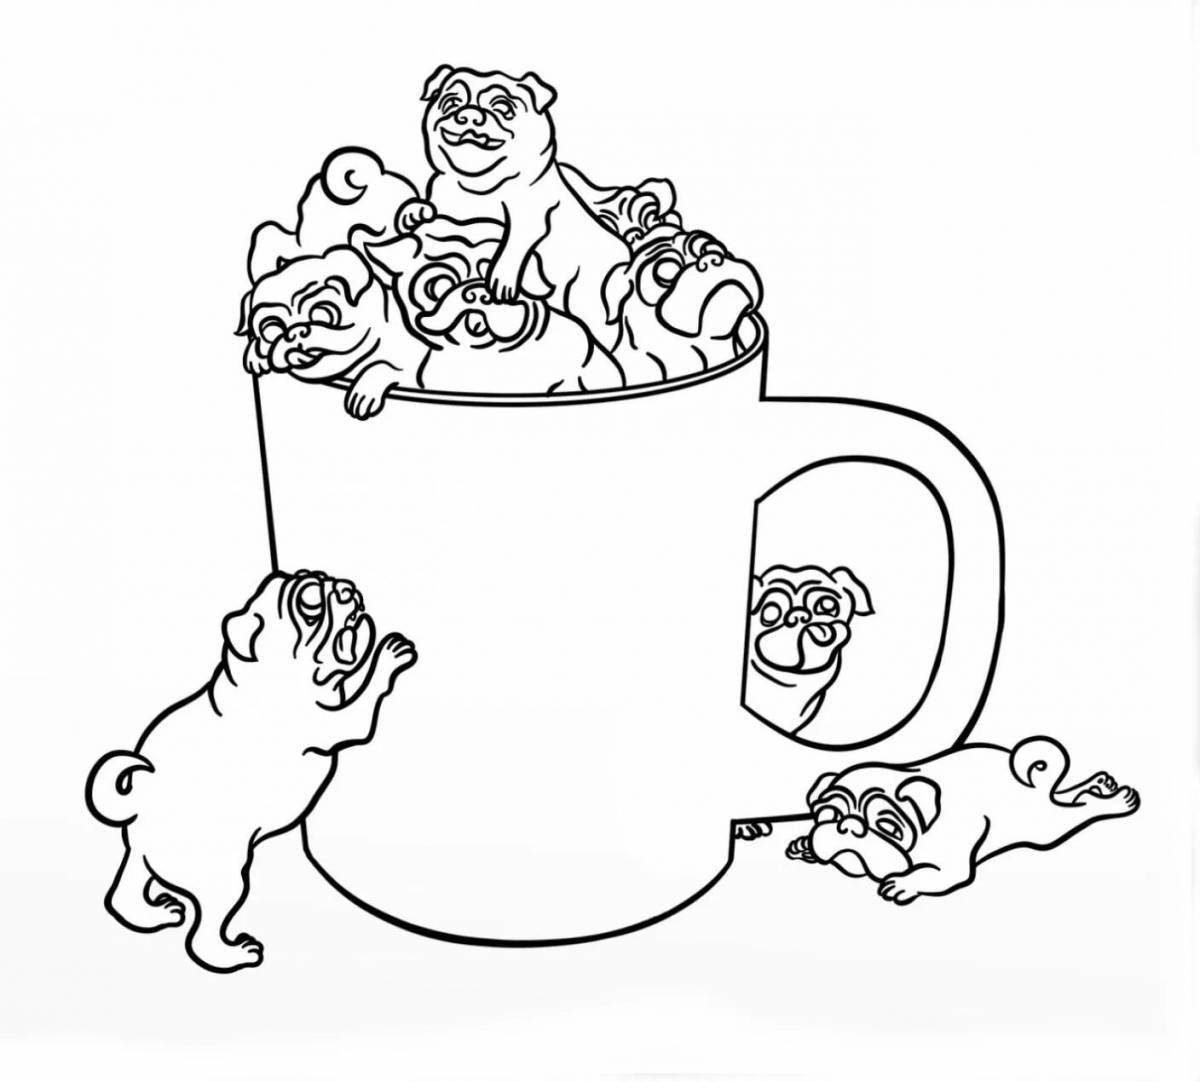 Amazing pug coloring page for kids